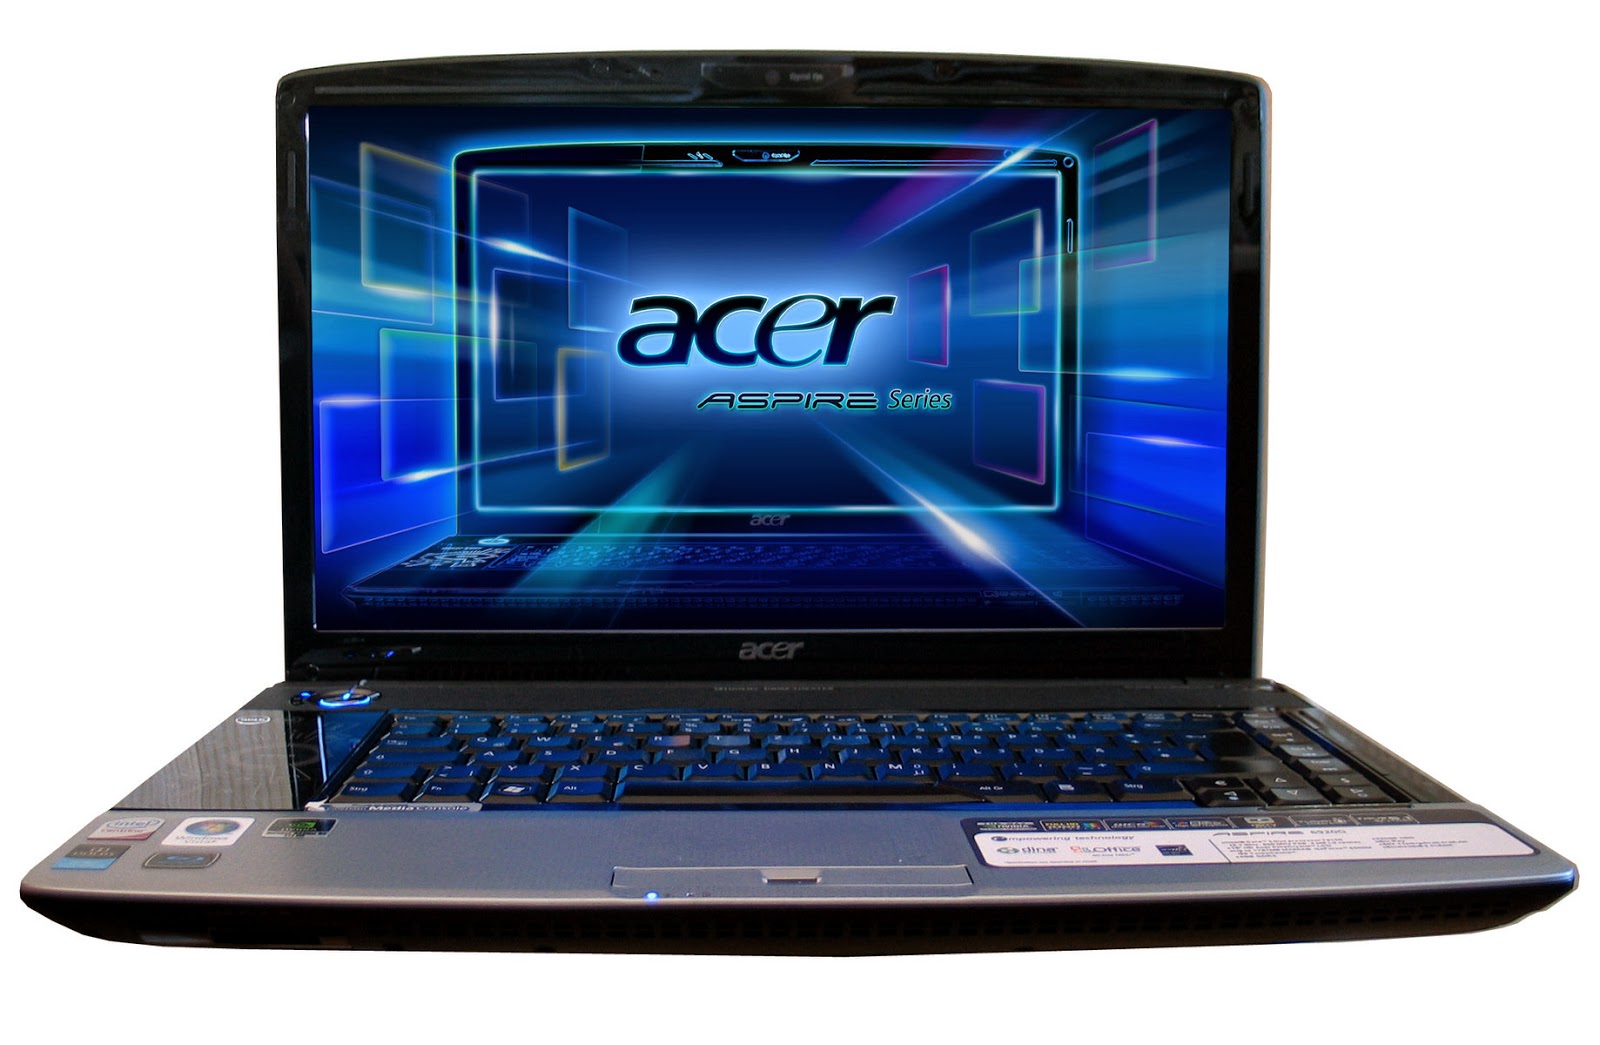 acer aspire 1640 drivers windows 7 free download